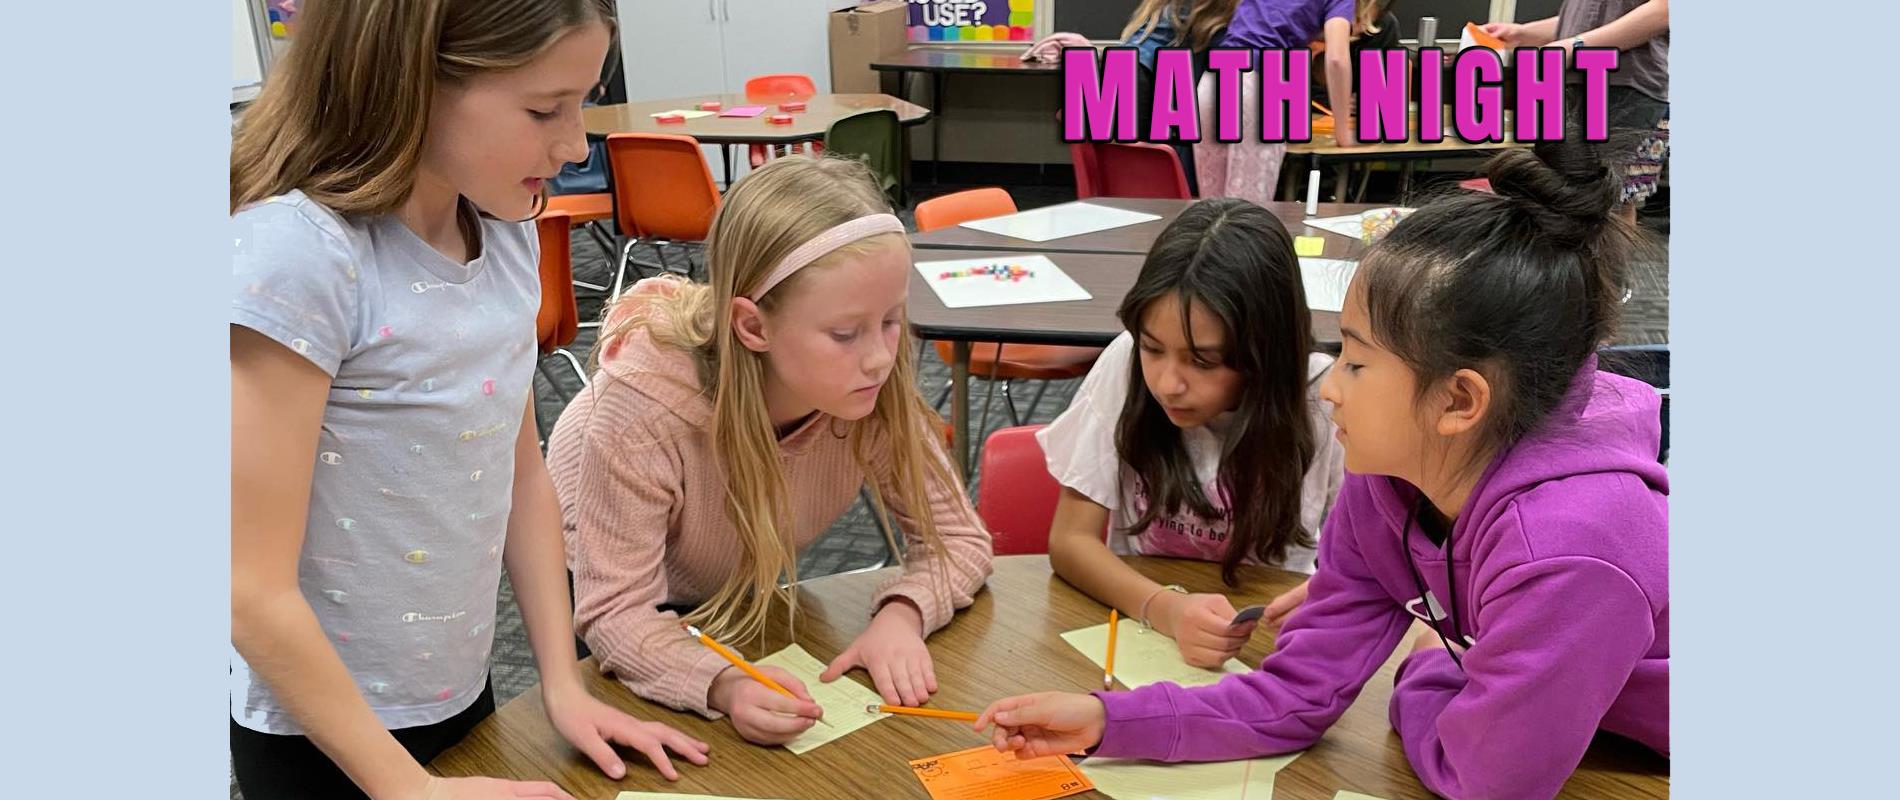 Students working together at Math Night